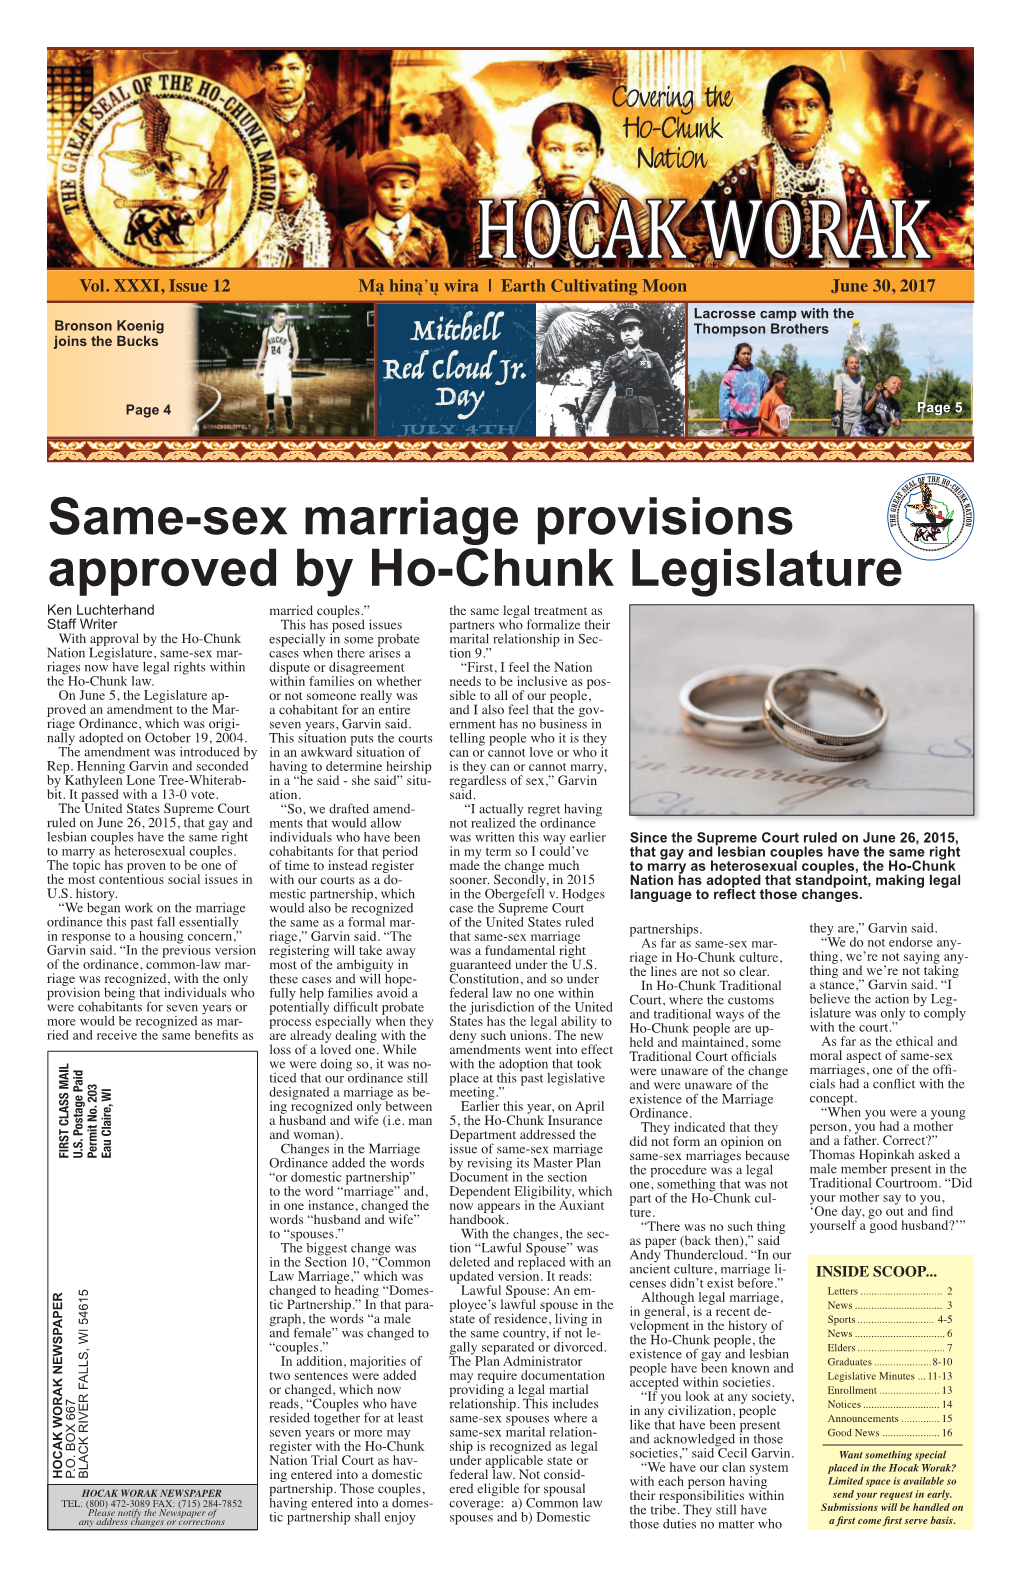 Same-Sex Marriage Provisions Approved by Ho-Chunk Legislature